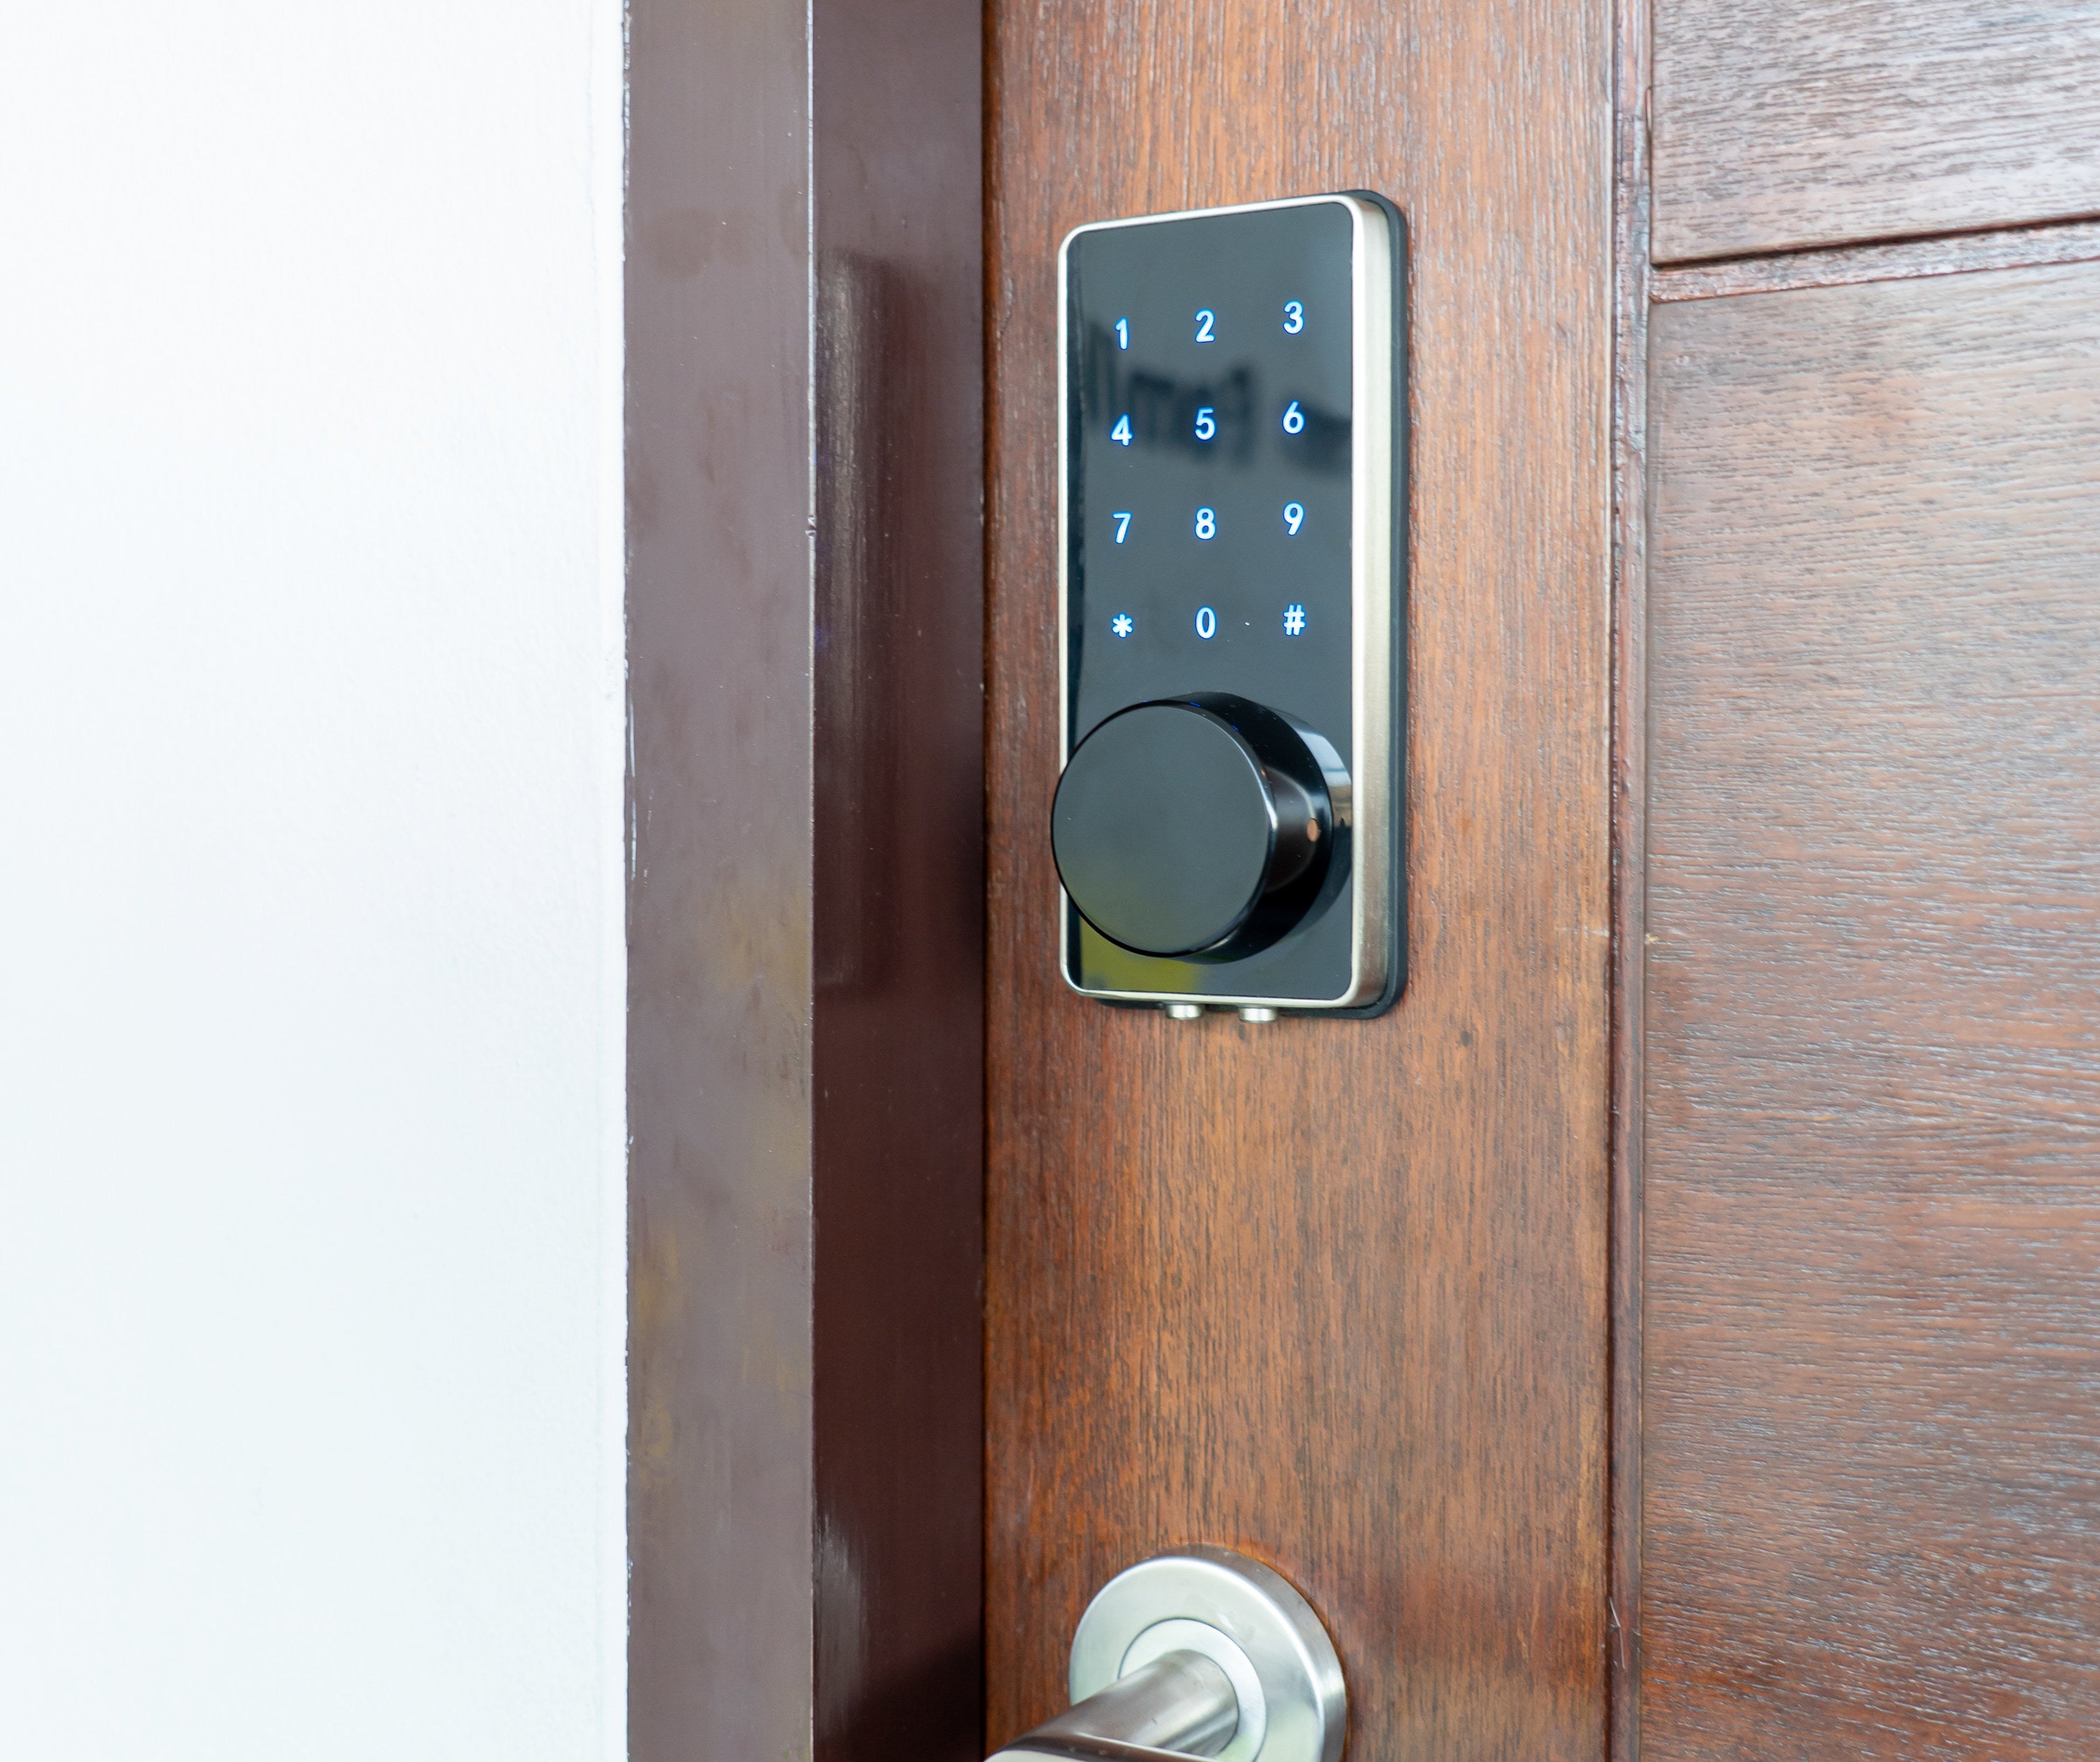 a touch pad lock for the front door